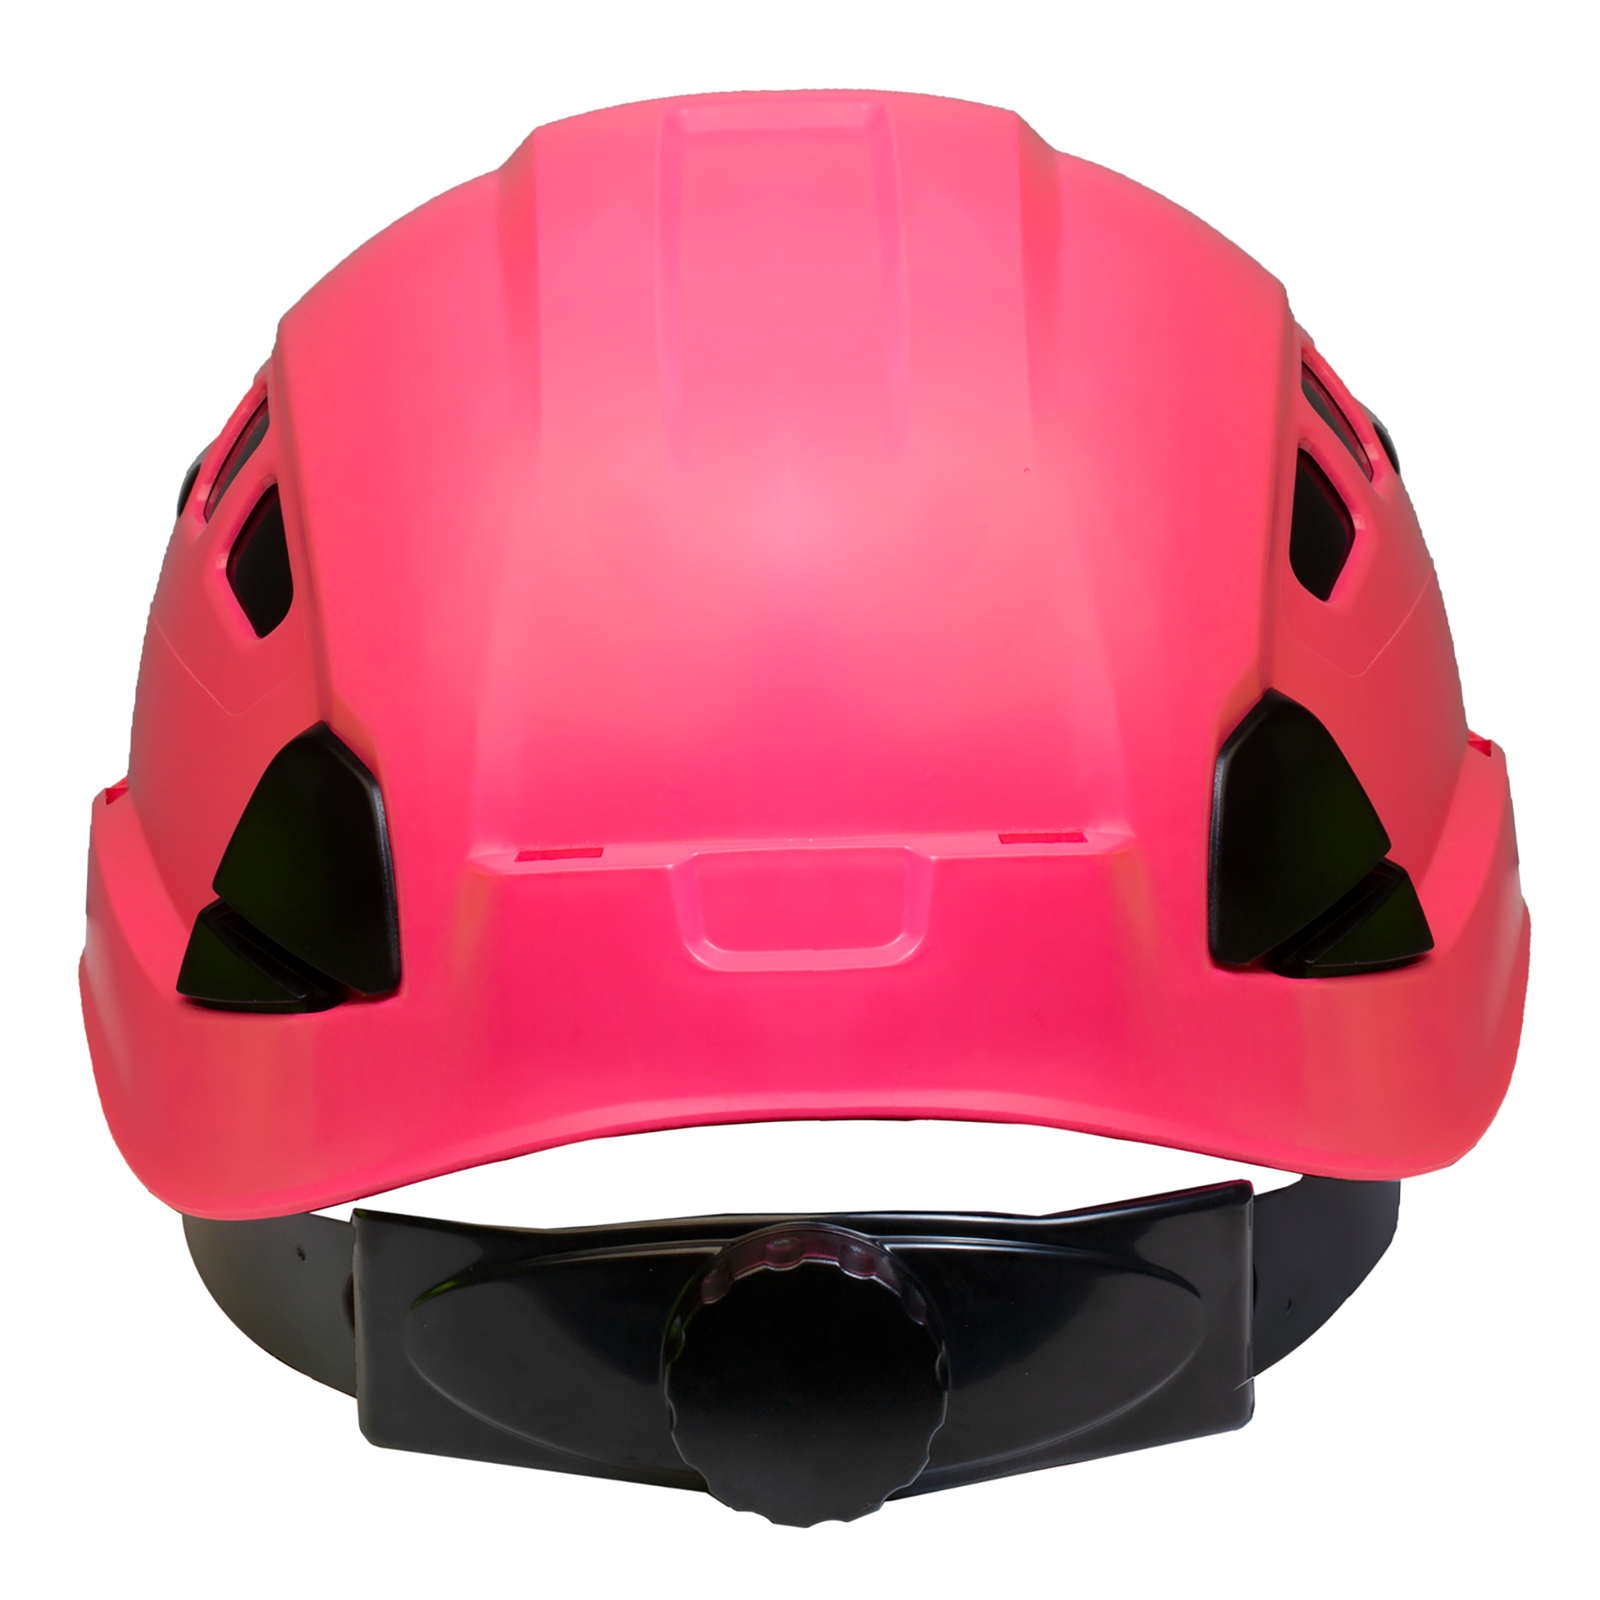 Ventilated Rescue Hard Hat with Adjustable 6 Point Suspension - PinkFit - Collection